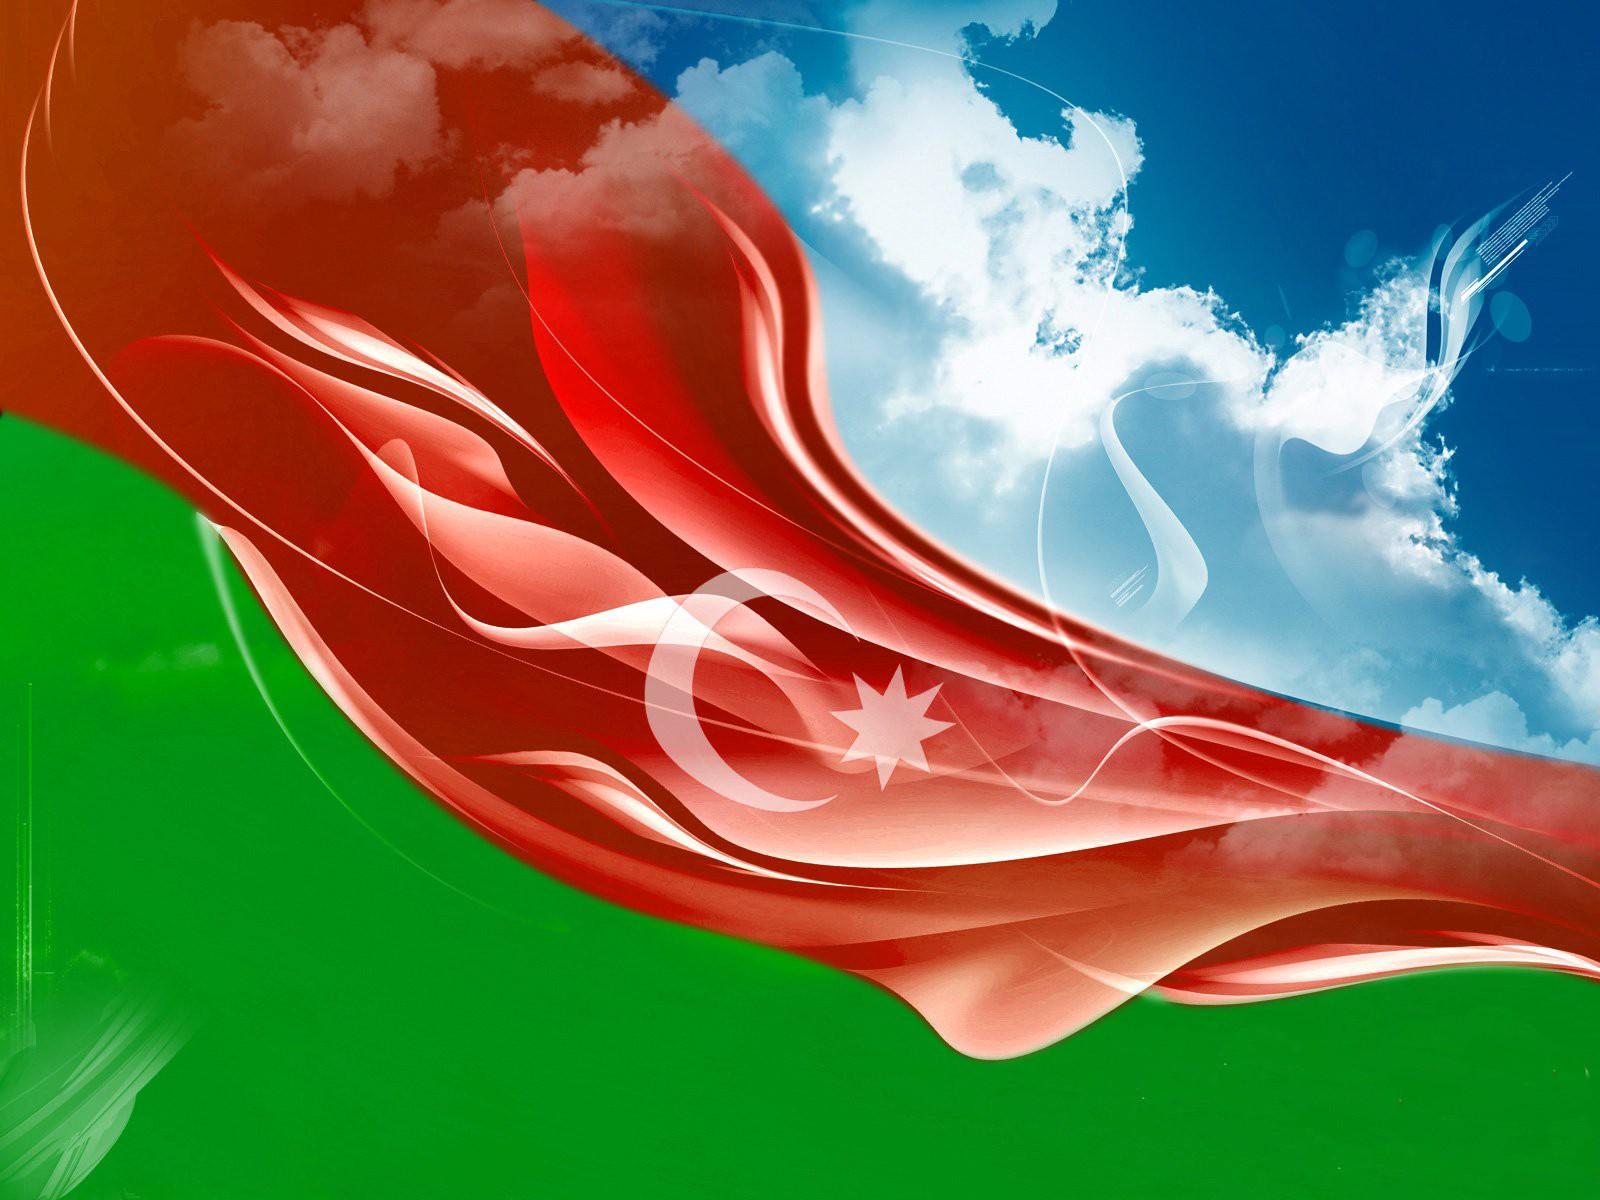 LATEST WALLPAPERS, D WALLPAPERS, AMAZING WALLPAPERS Azerbaijan